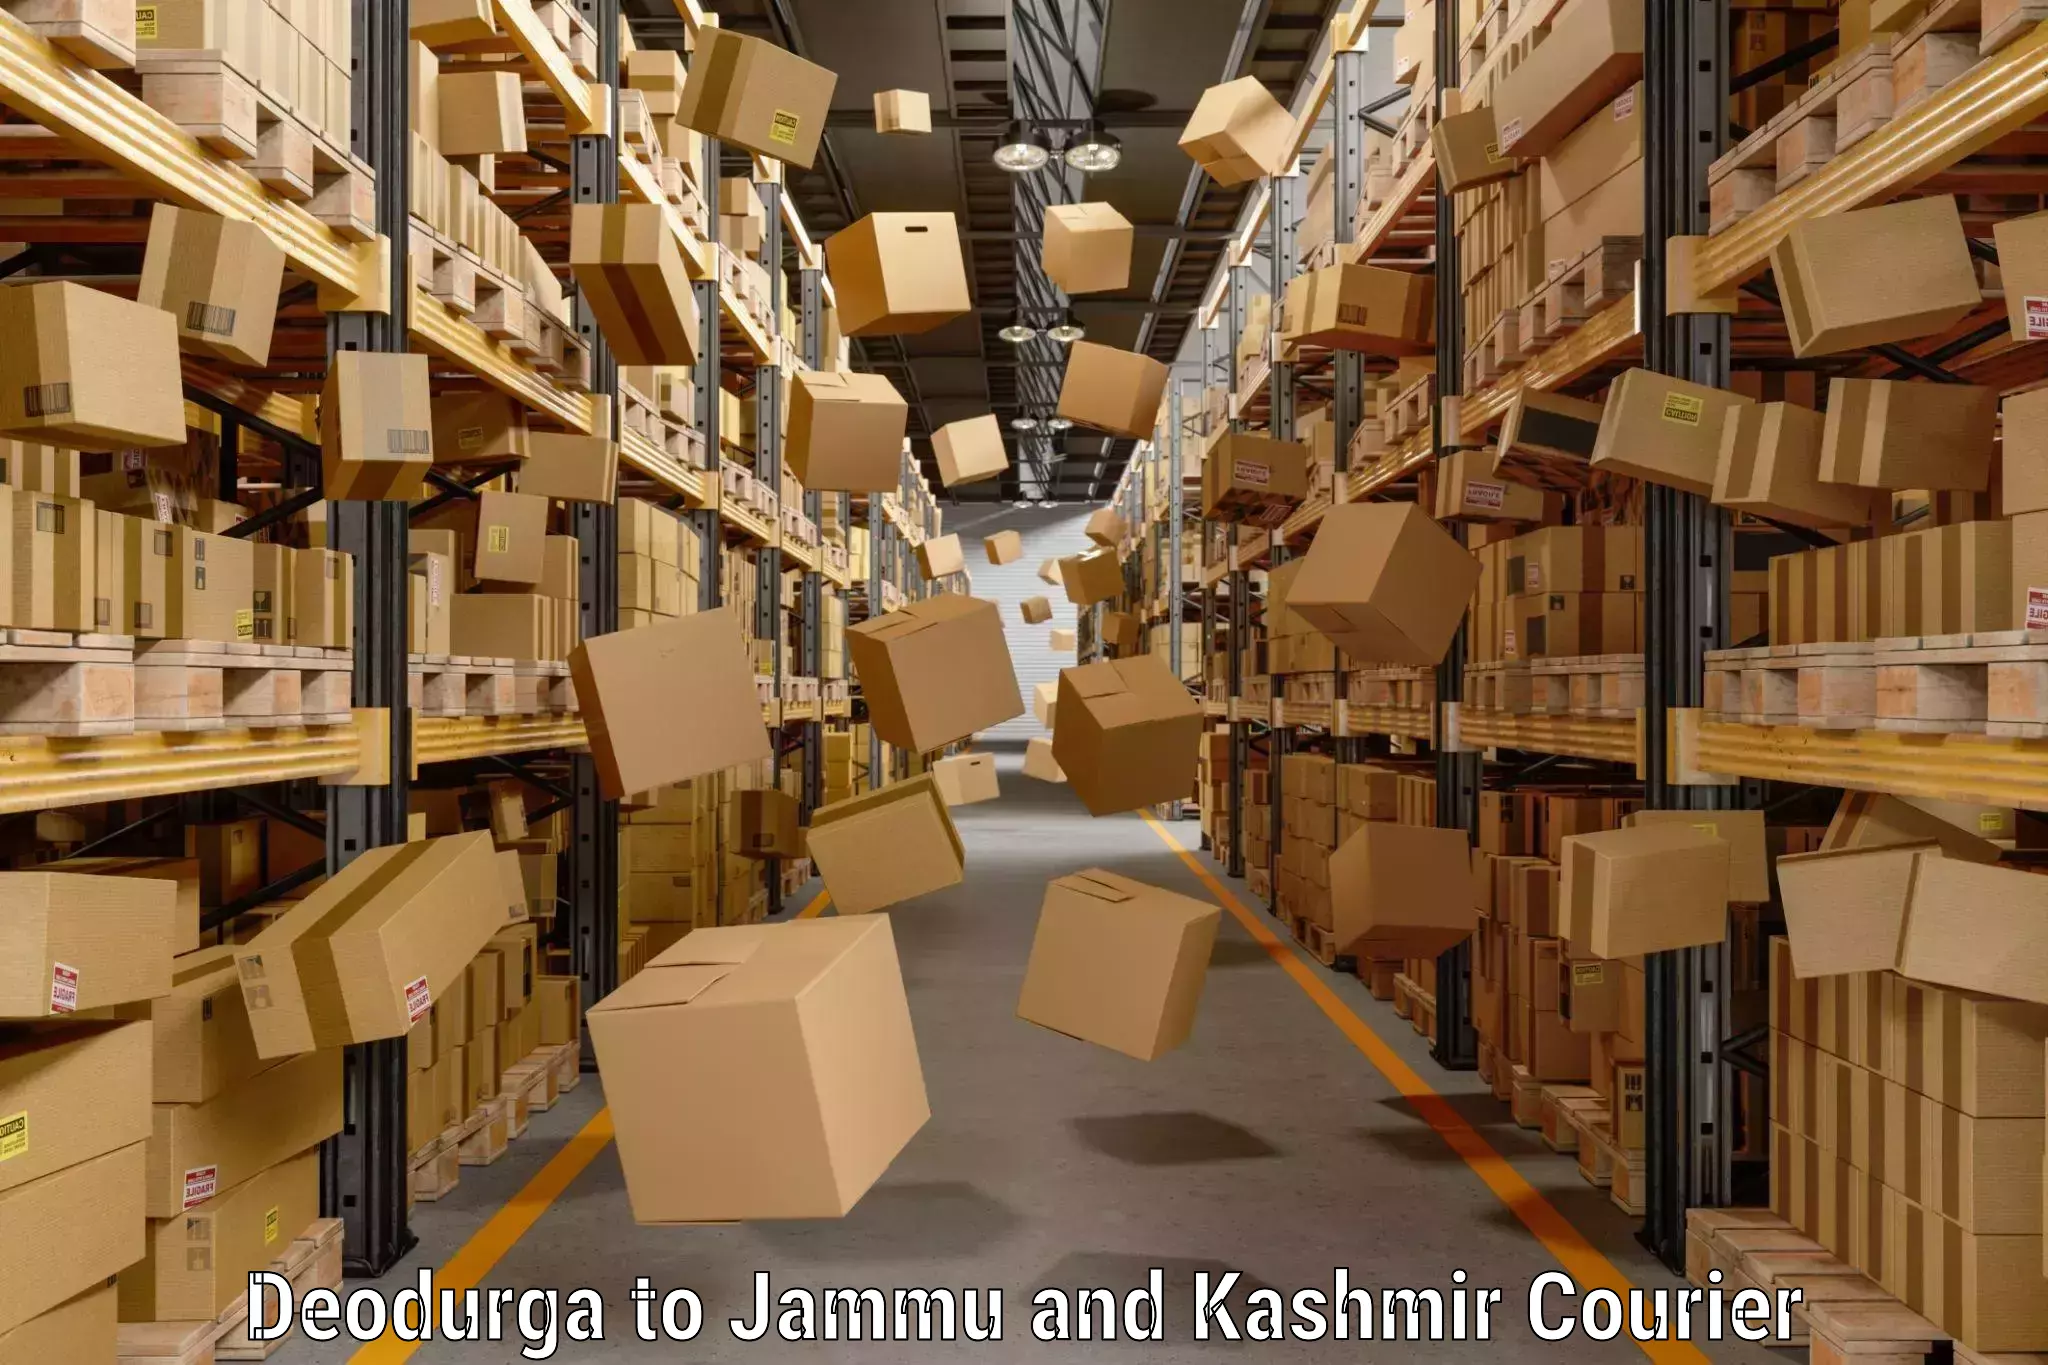 Luggage delivery system Deodurga to Jammu and Kashmir